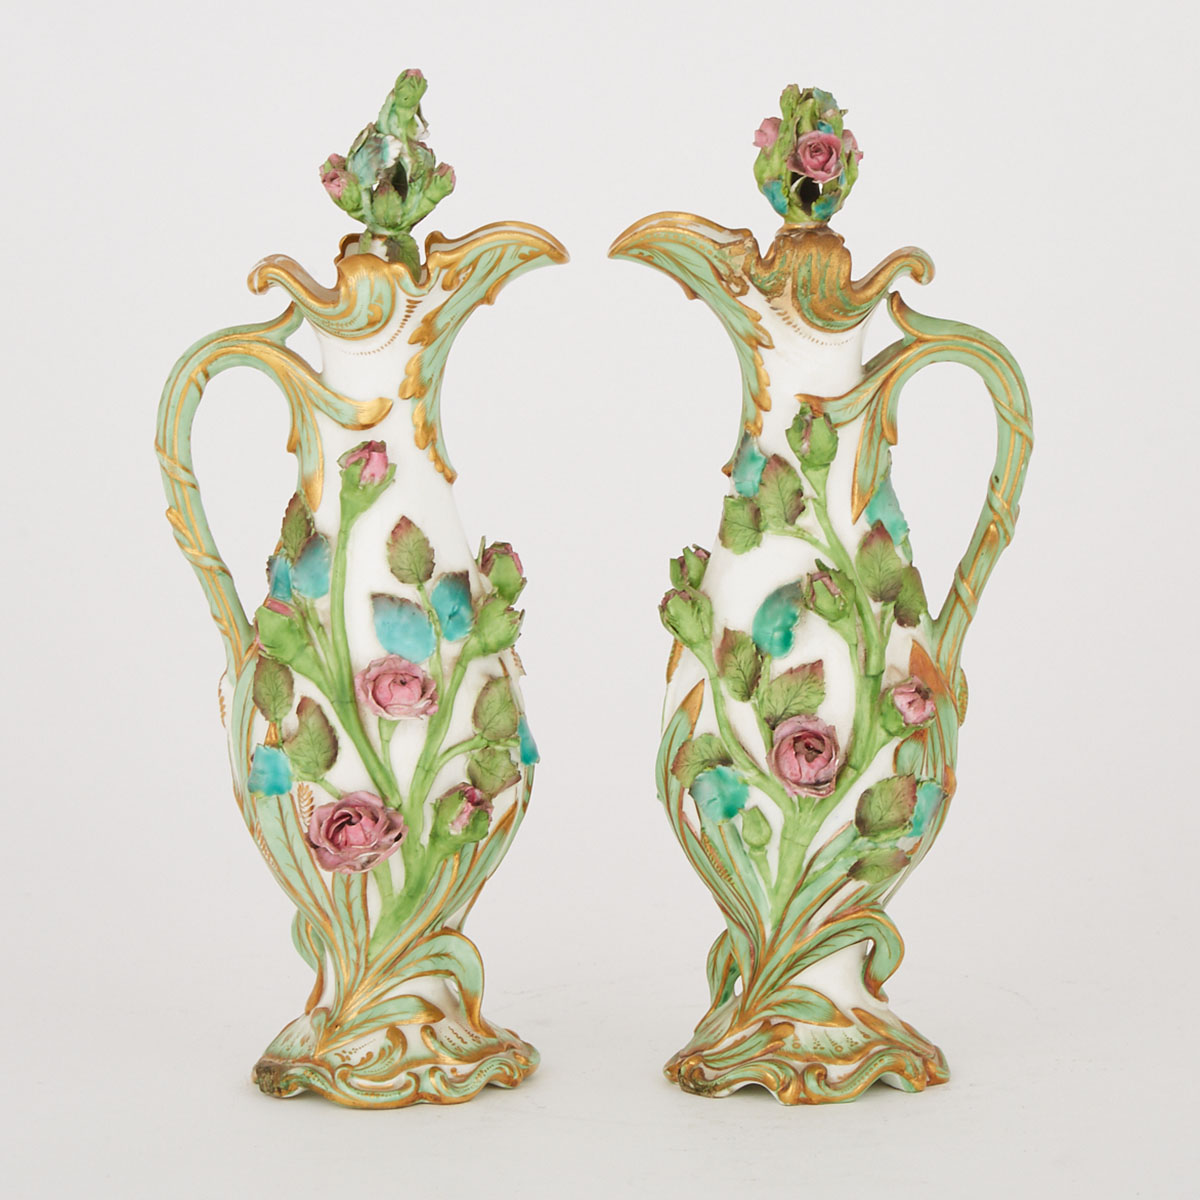 Pair of English Porcelain Coalbrookdale Style Flower-Encrusted Ewers with Stoppers, c.1840